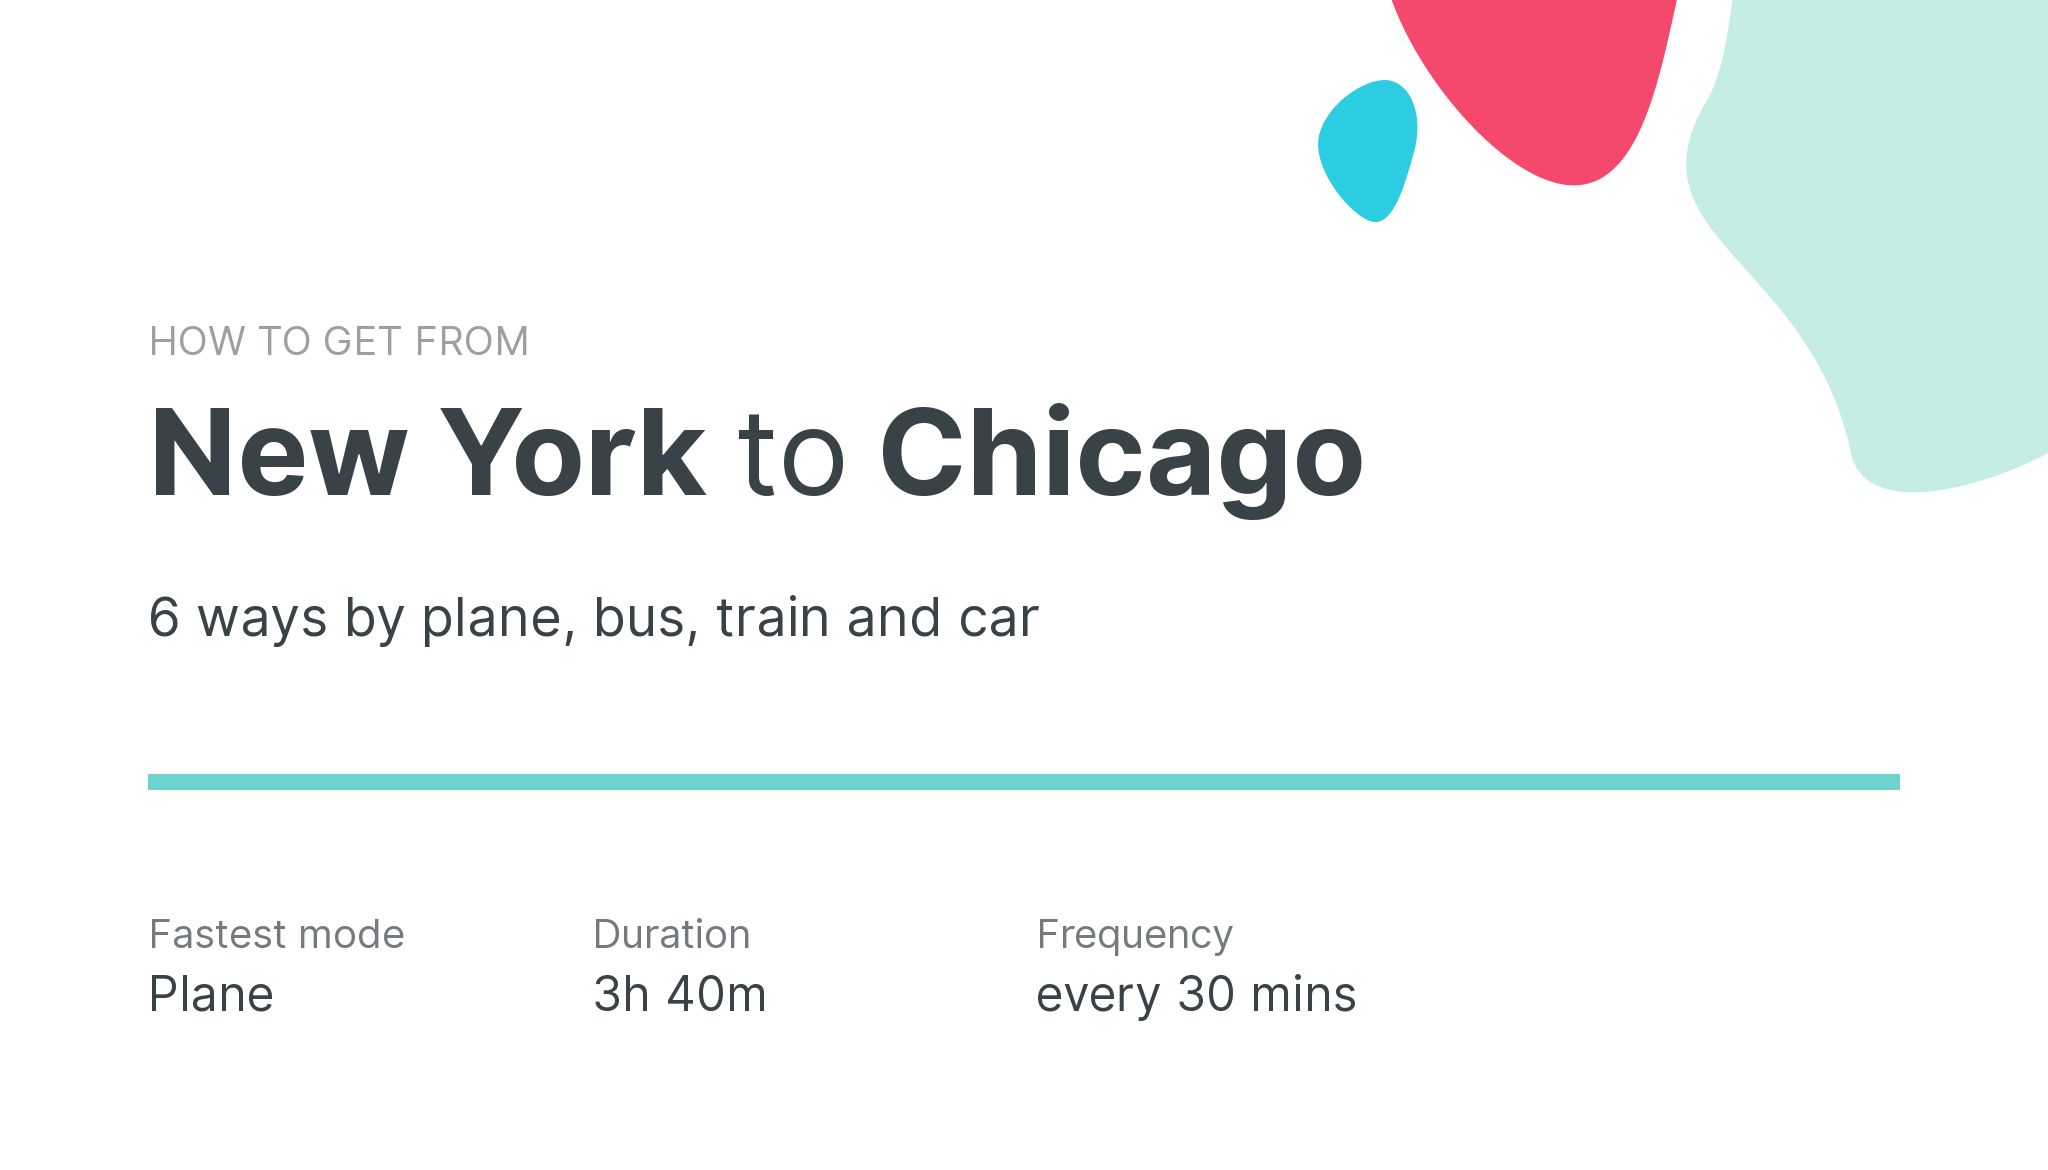 How do I get from New York to Chicago